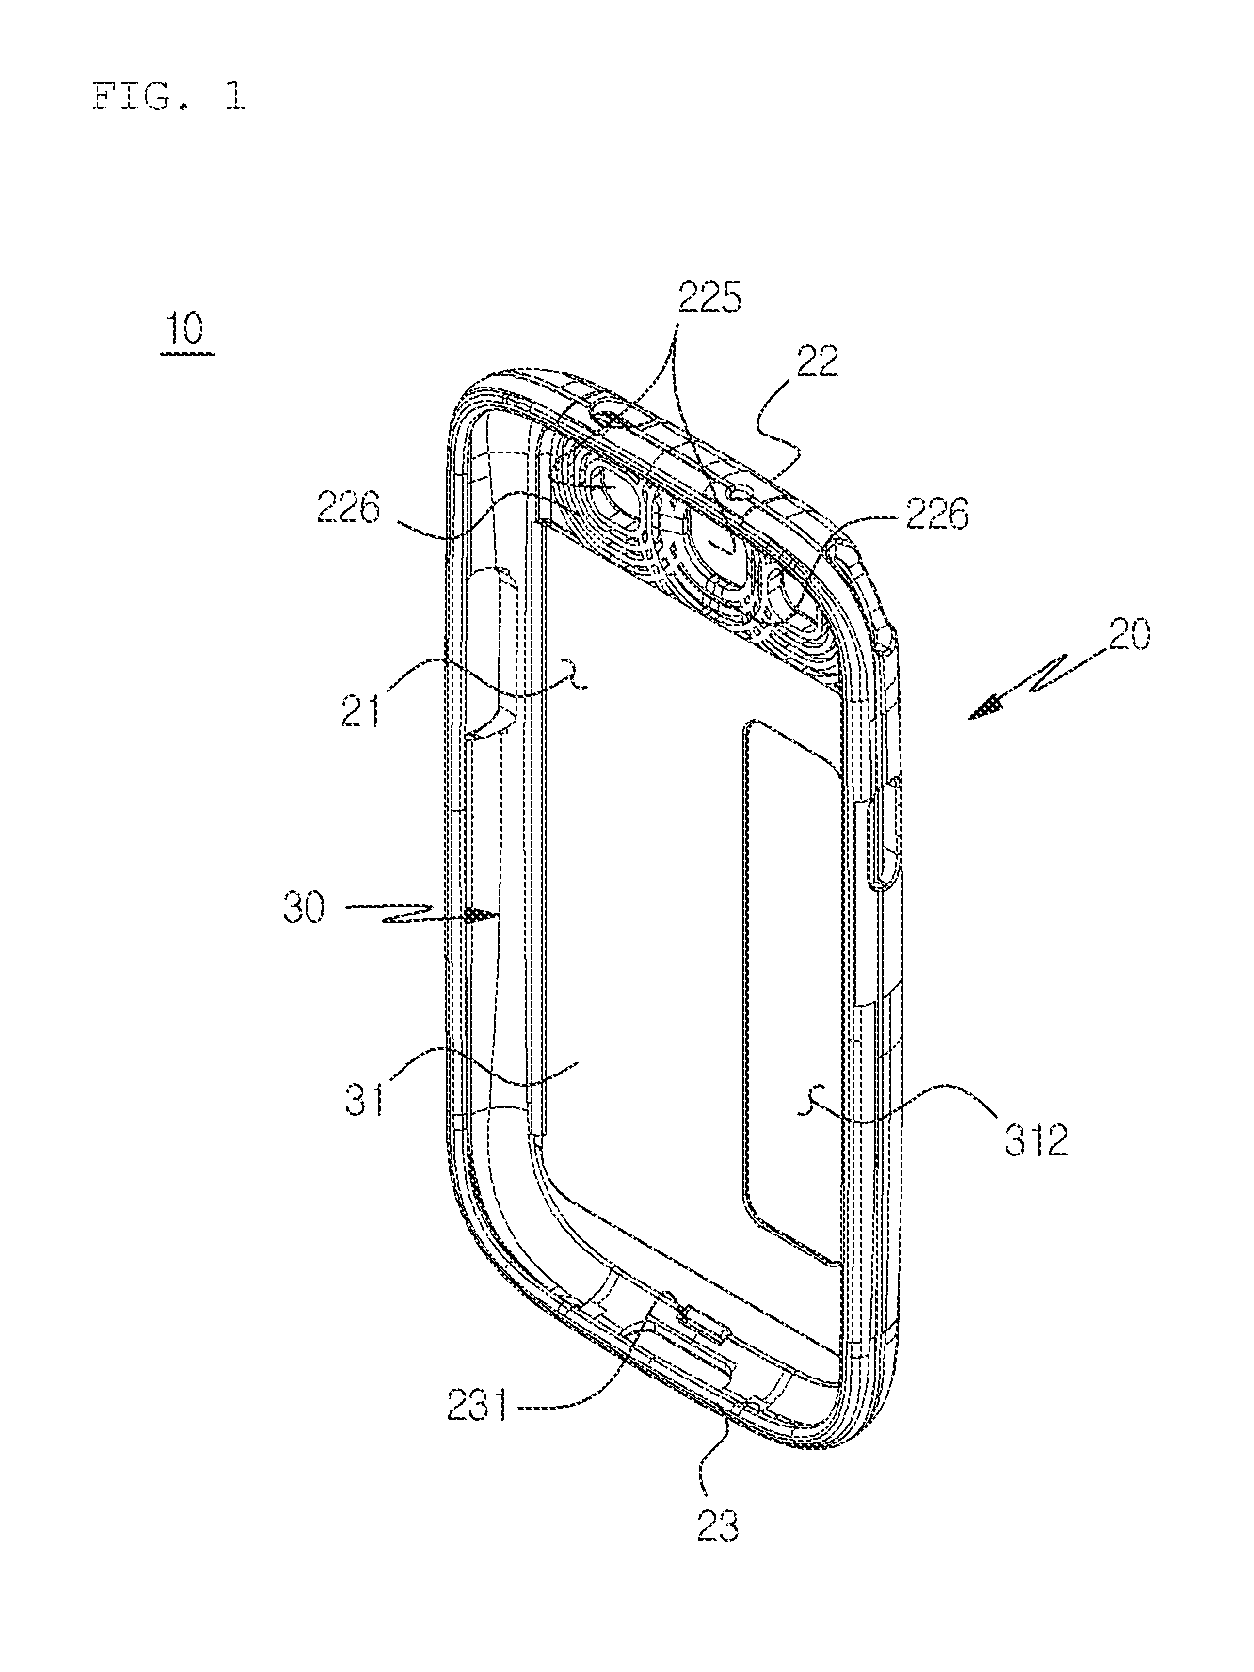 Cellular-phone case having retractable card holding structure